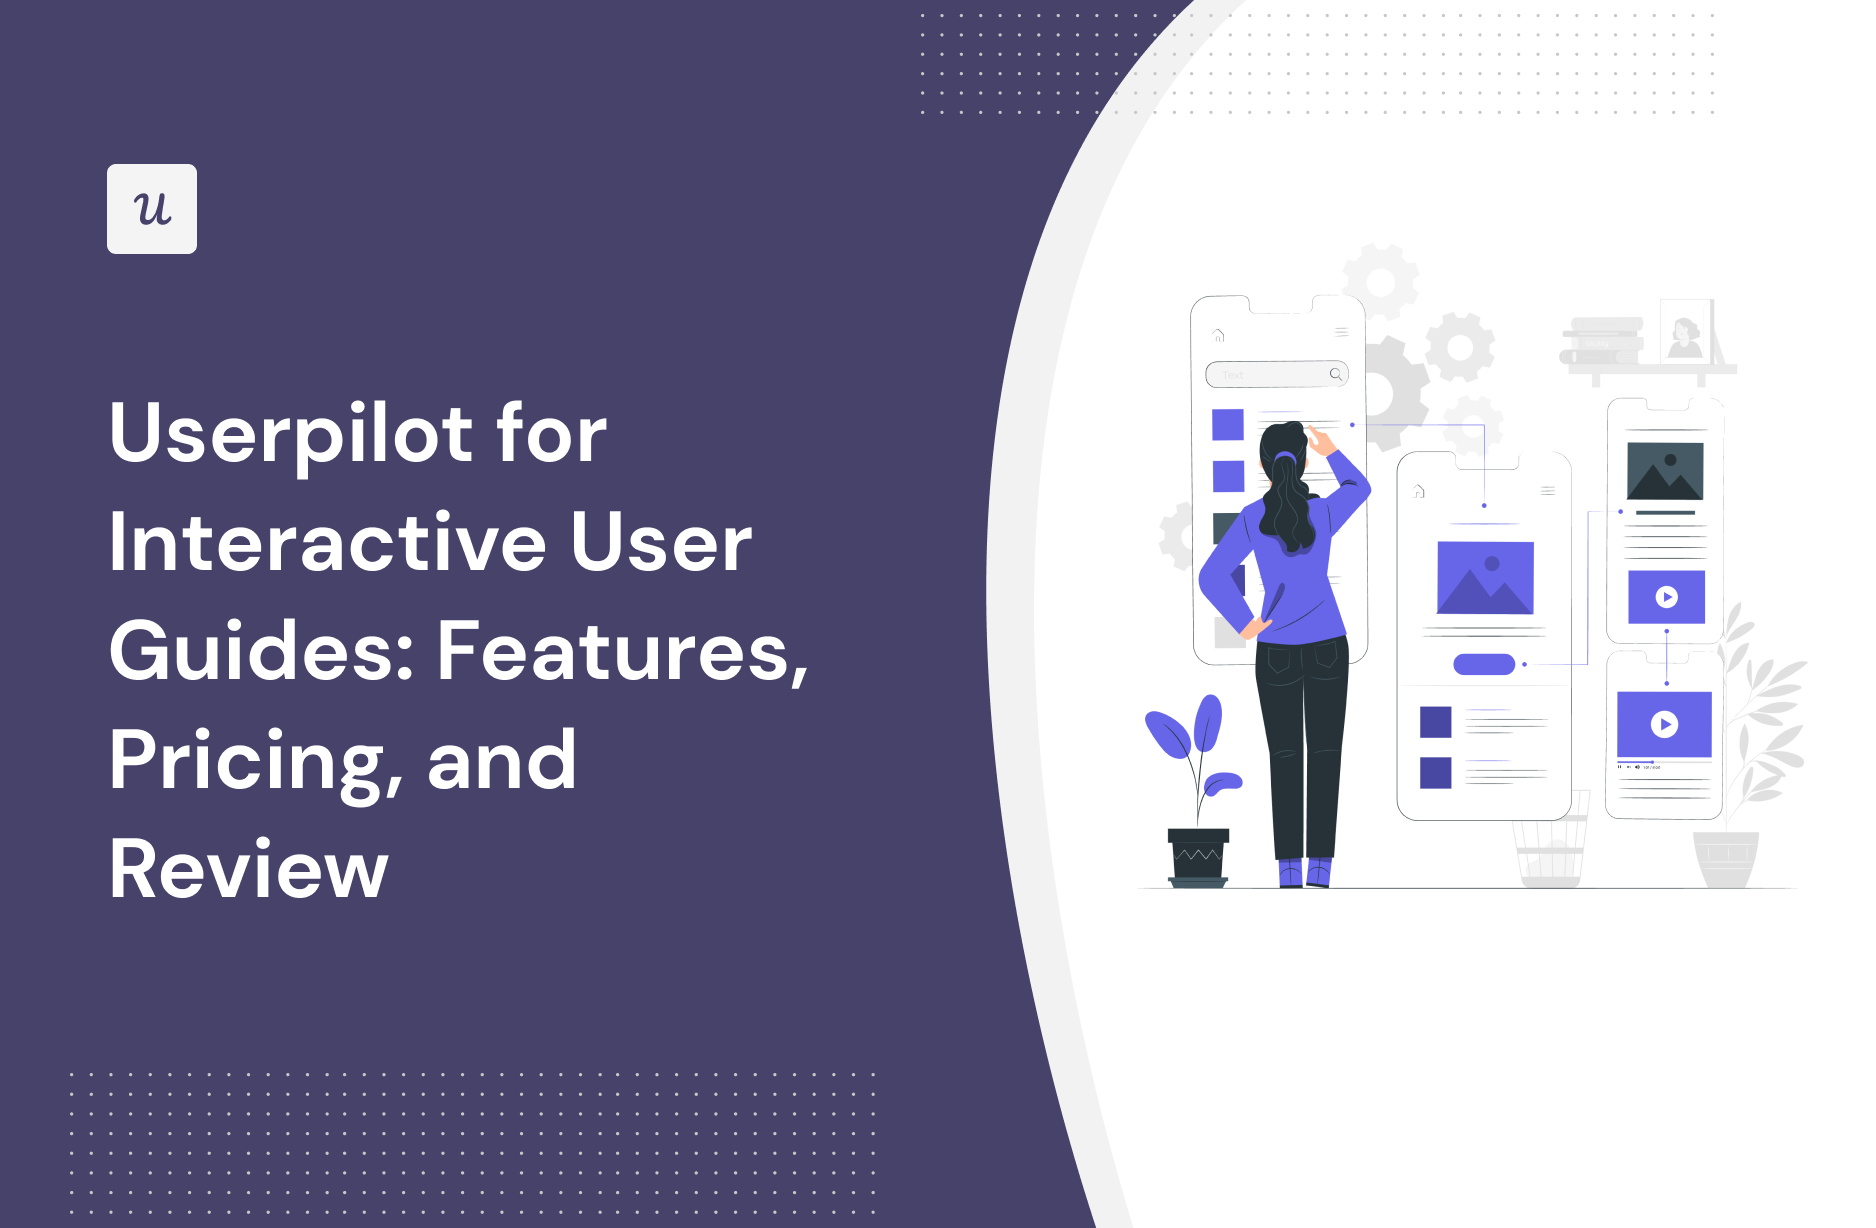 Userpilot for Interactive User Guides: Features, Pricing, and Review